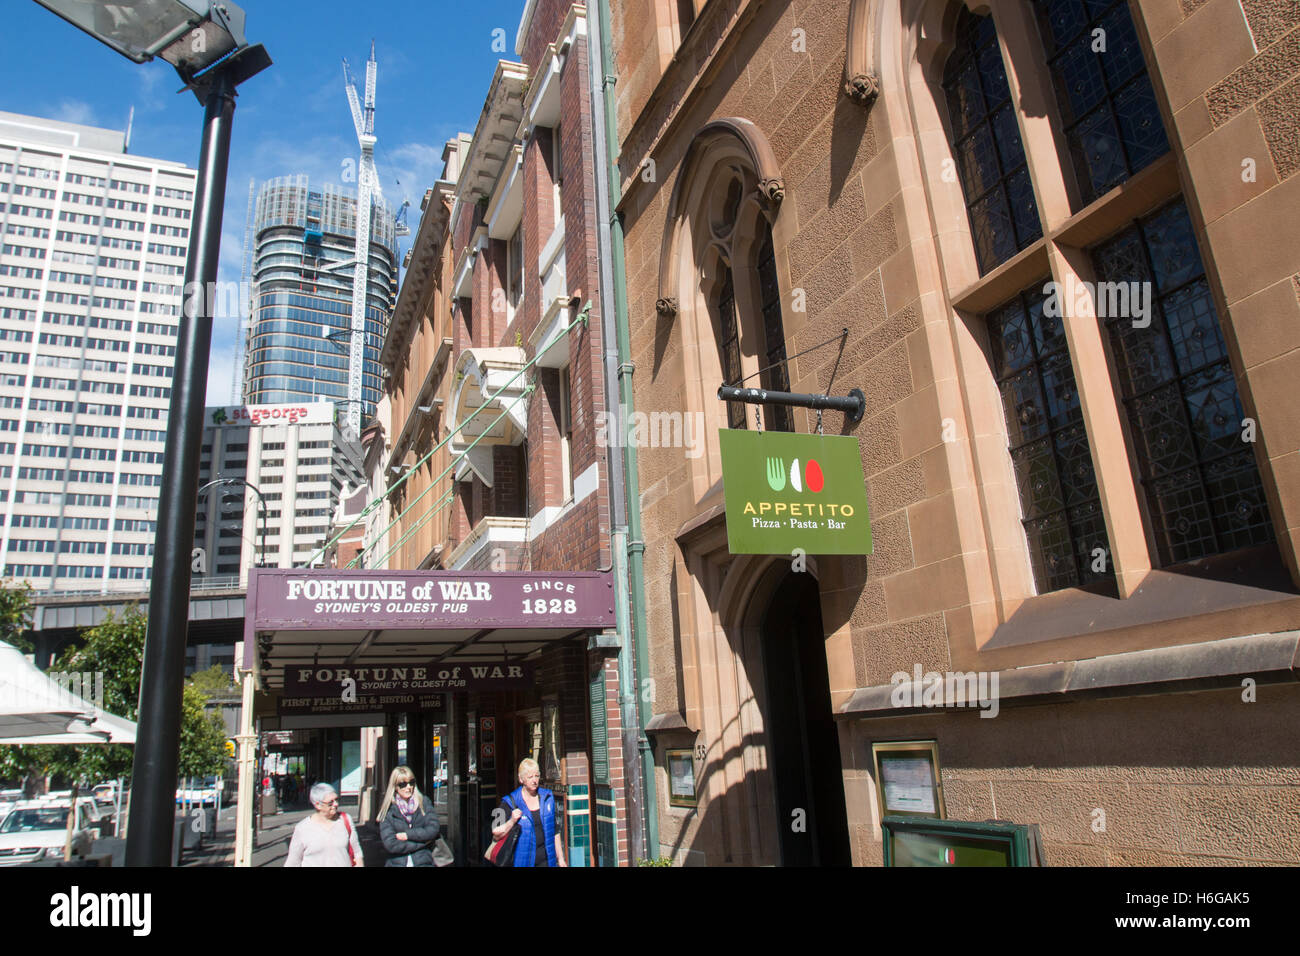 The historic Rocks area of Sydney, with Sydney's oldest pub the Fortune of War,Sydney,Australia Stock Photo